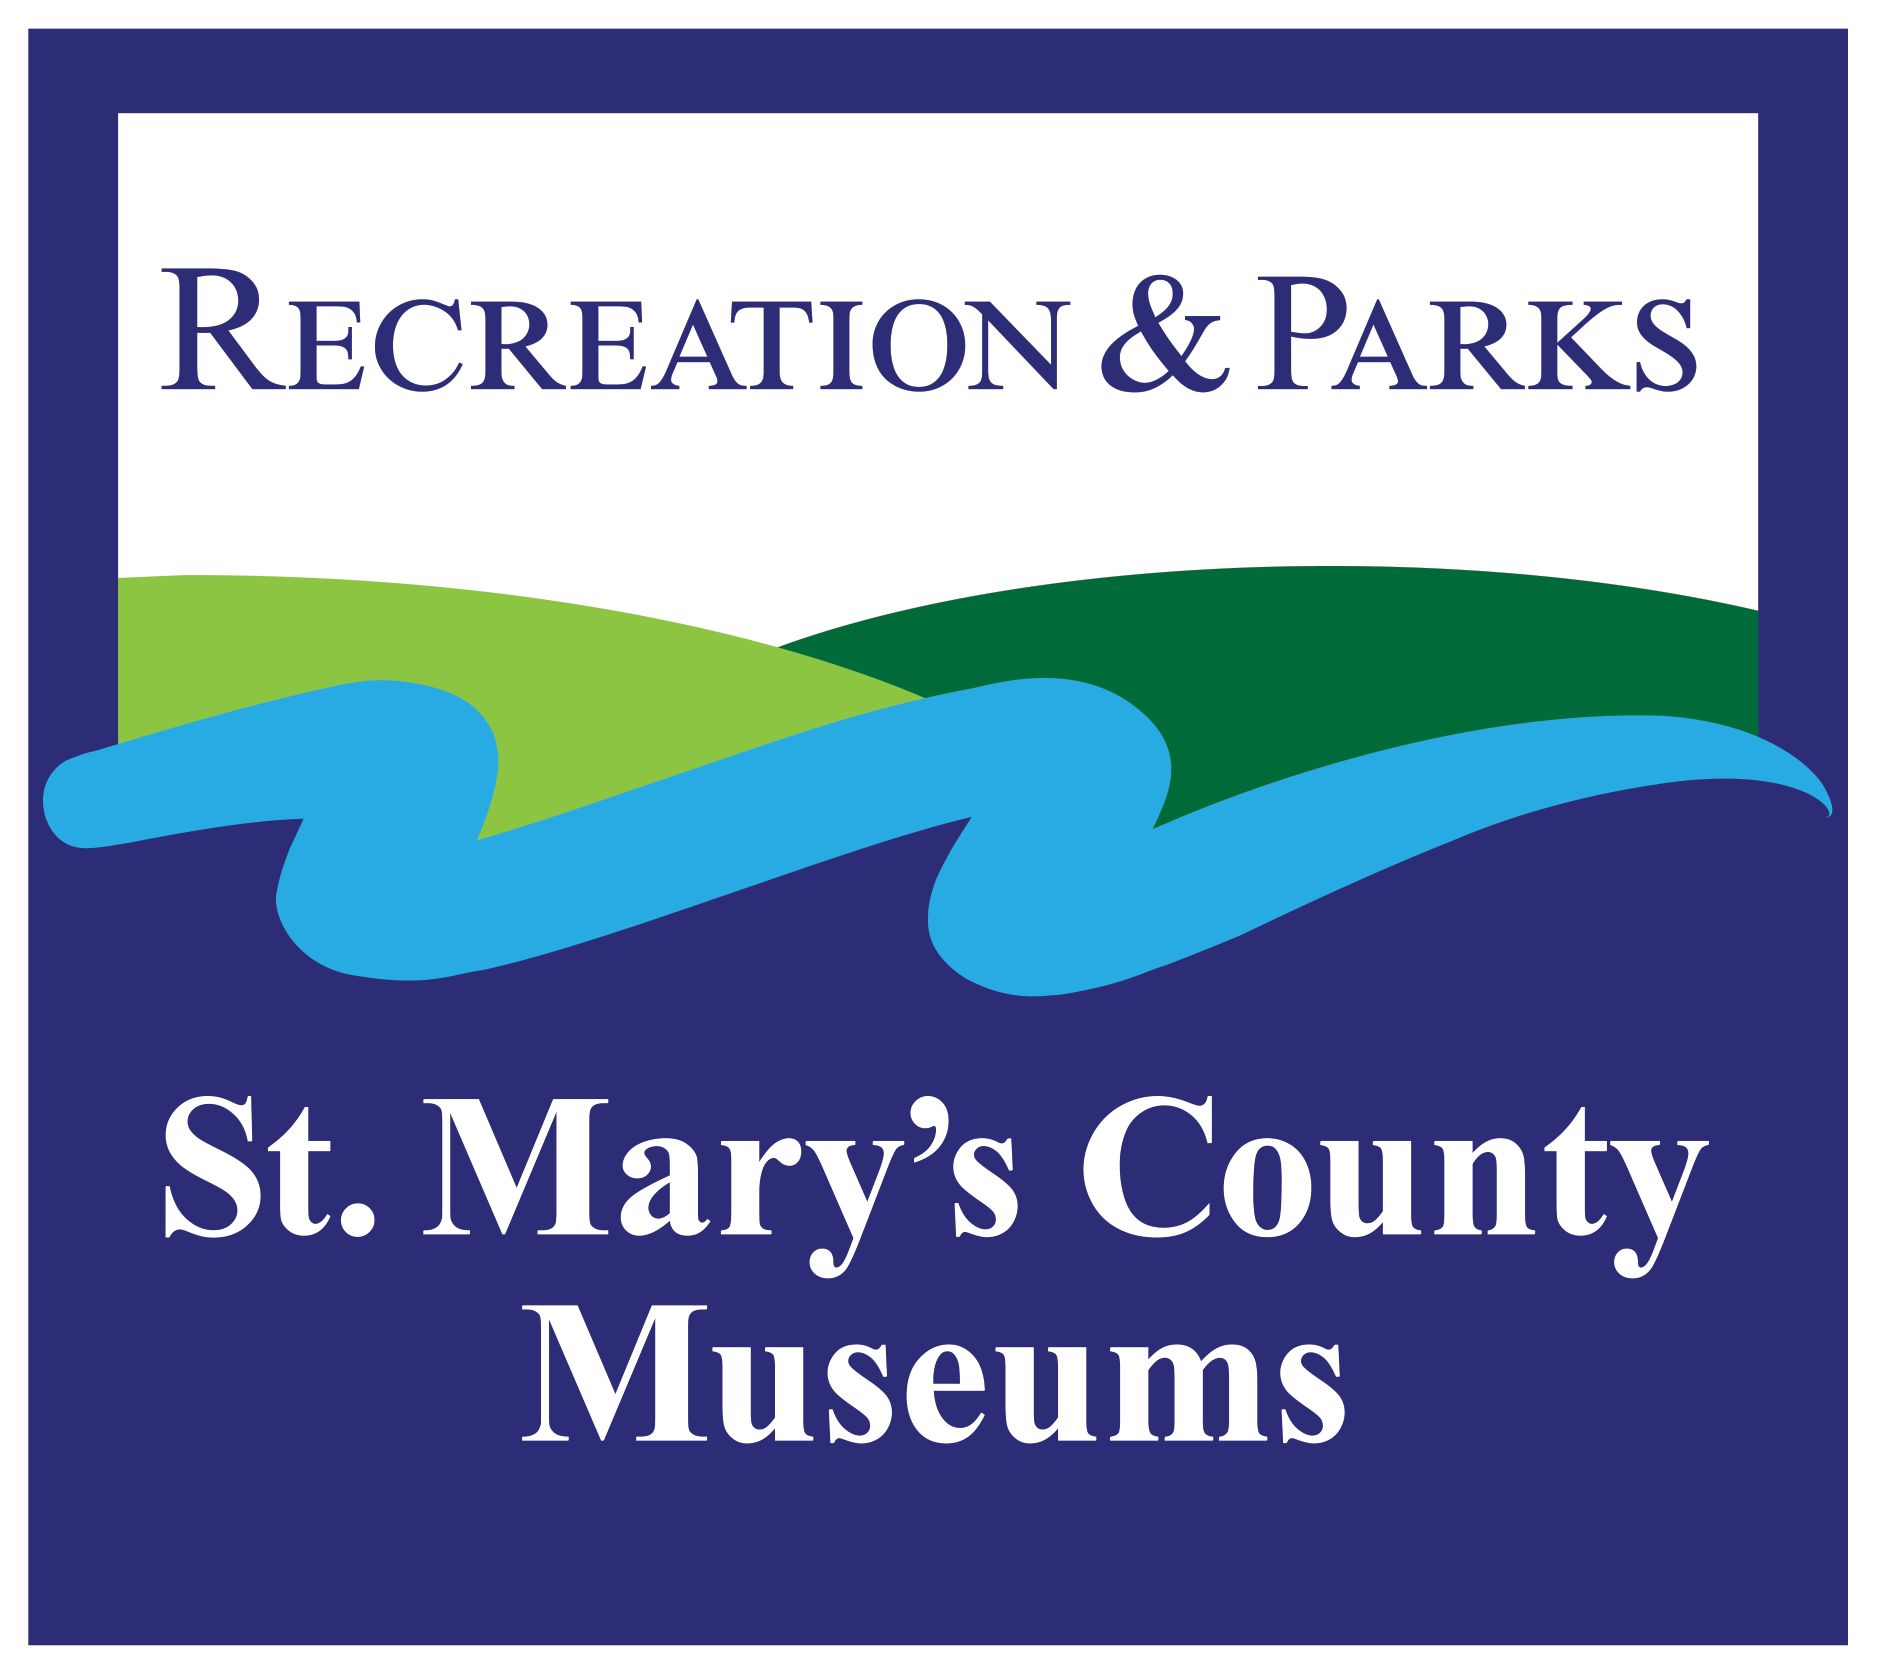 St. Mary's County Museum Division